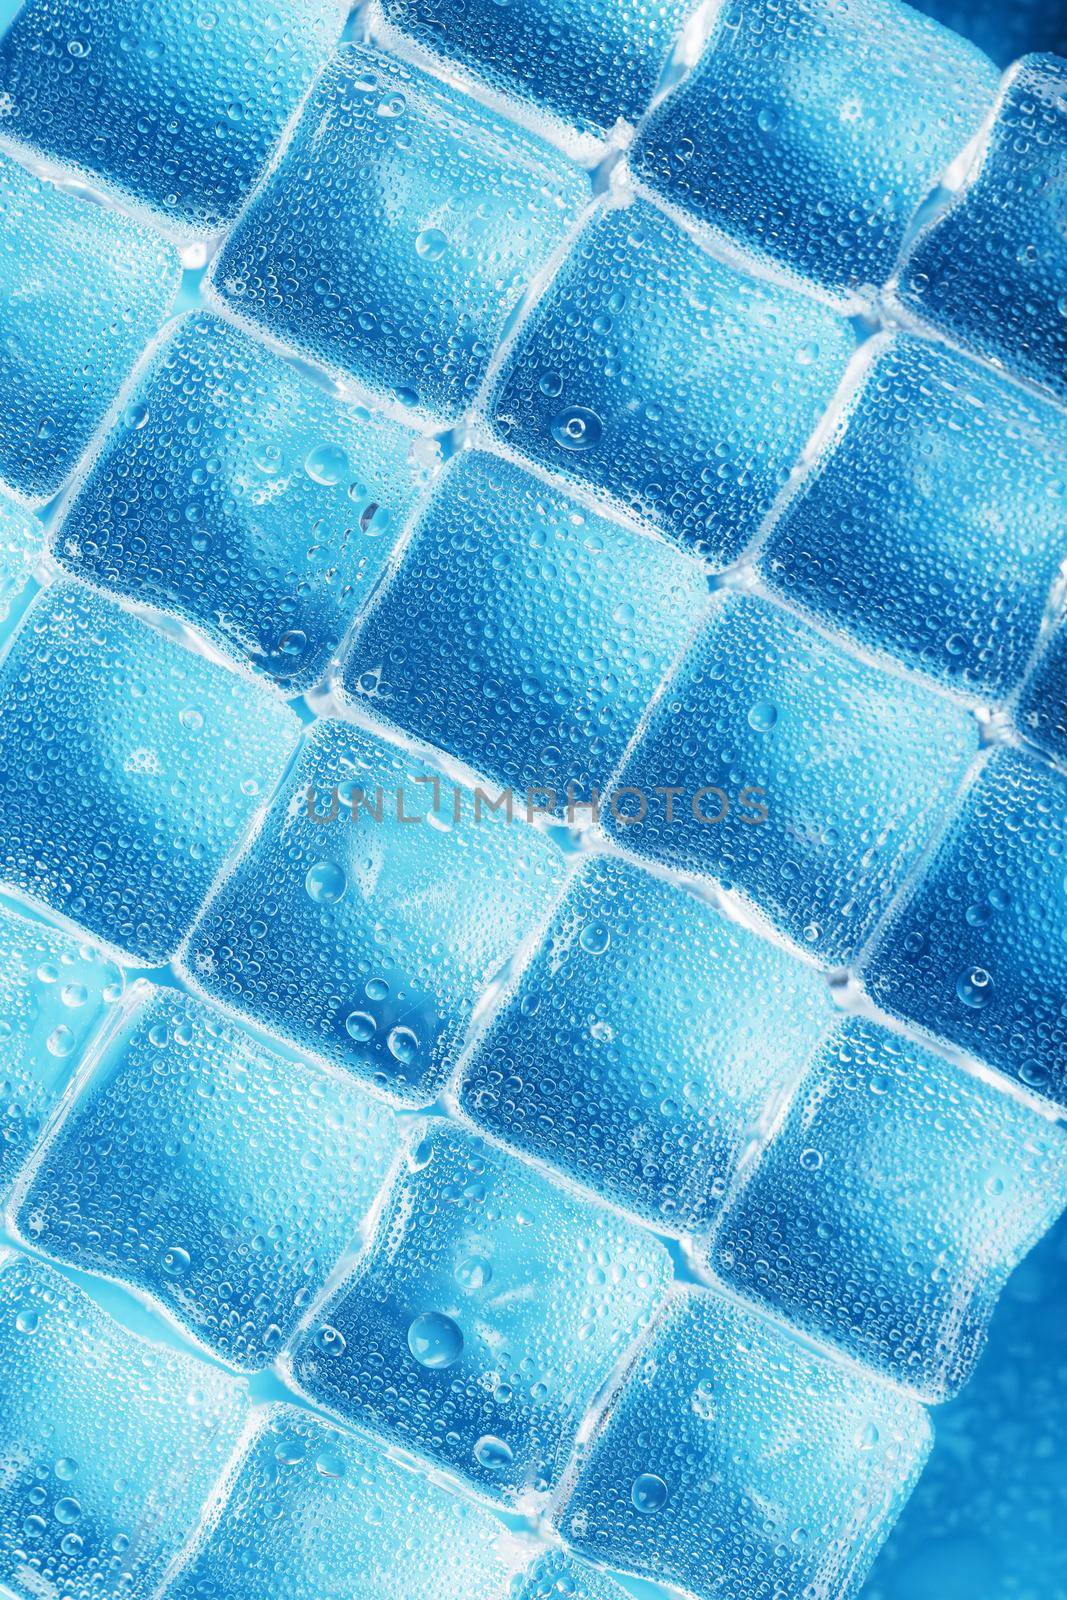 Background of ice cubes with drops in blue color in full screen by AlexGrec